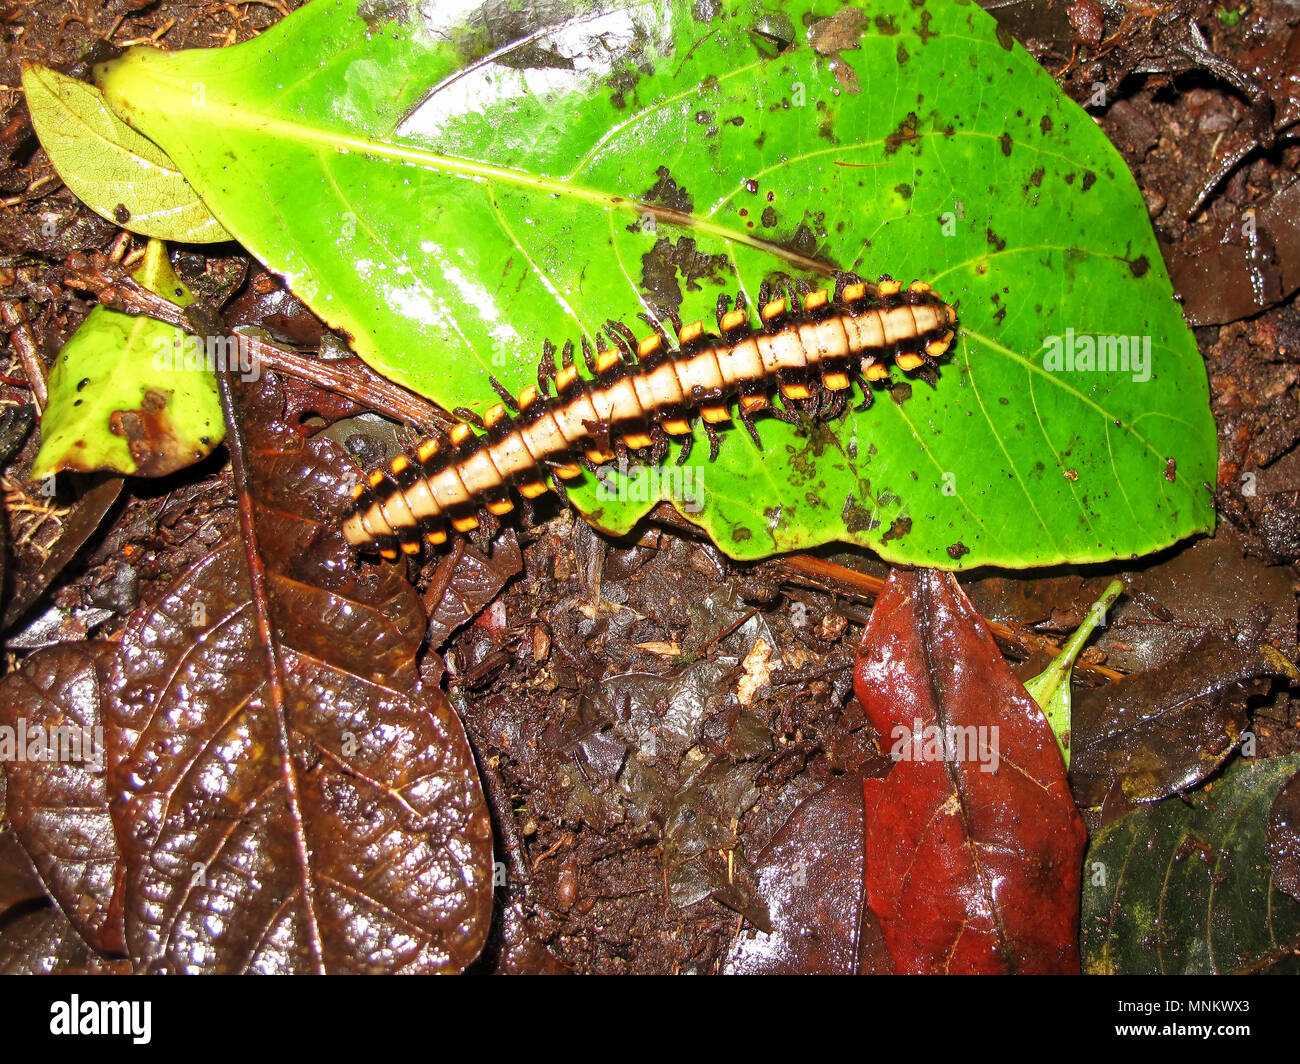 Polydesmid or flat-backed millipede in the Monteverde Cloud Forest Reserve, Costa Rica Stock Photo